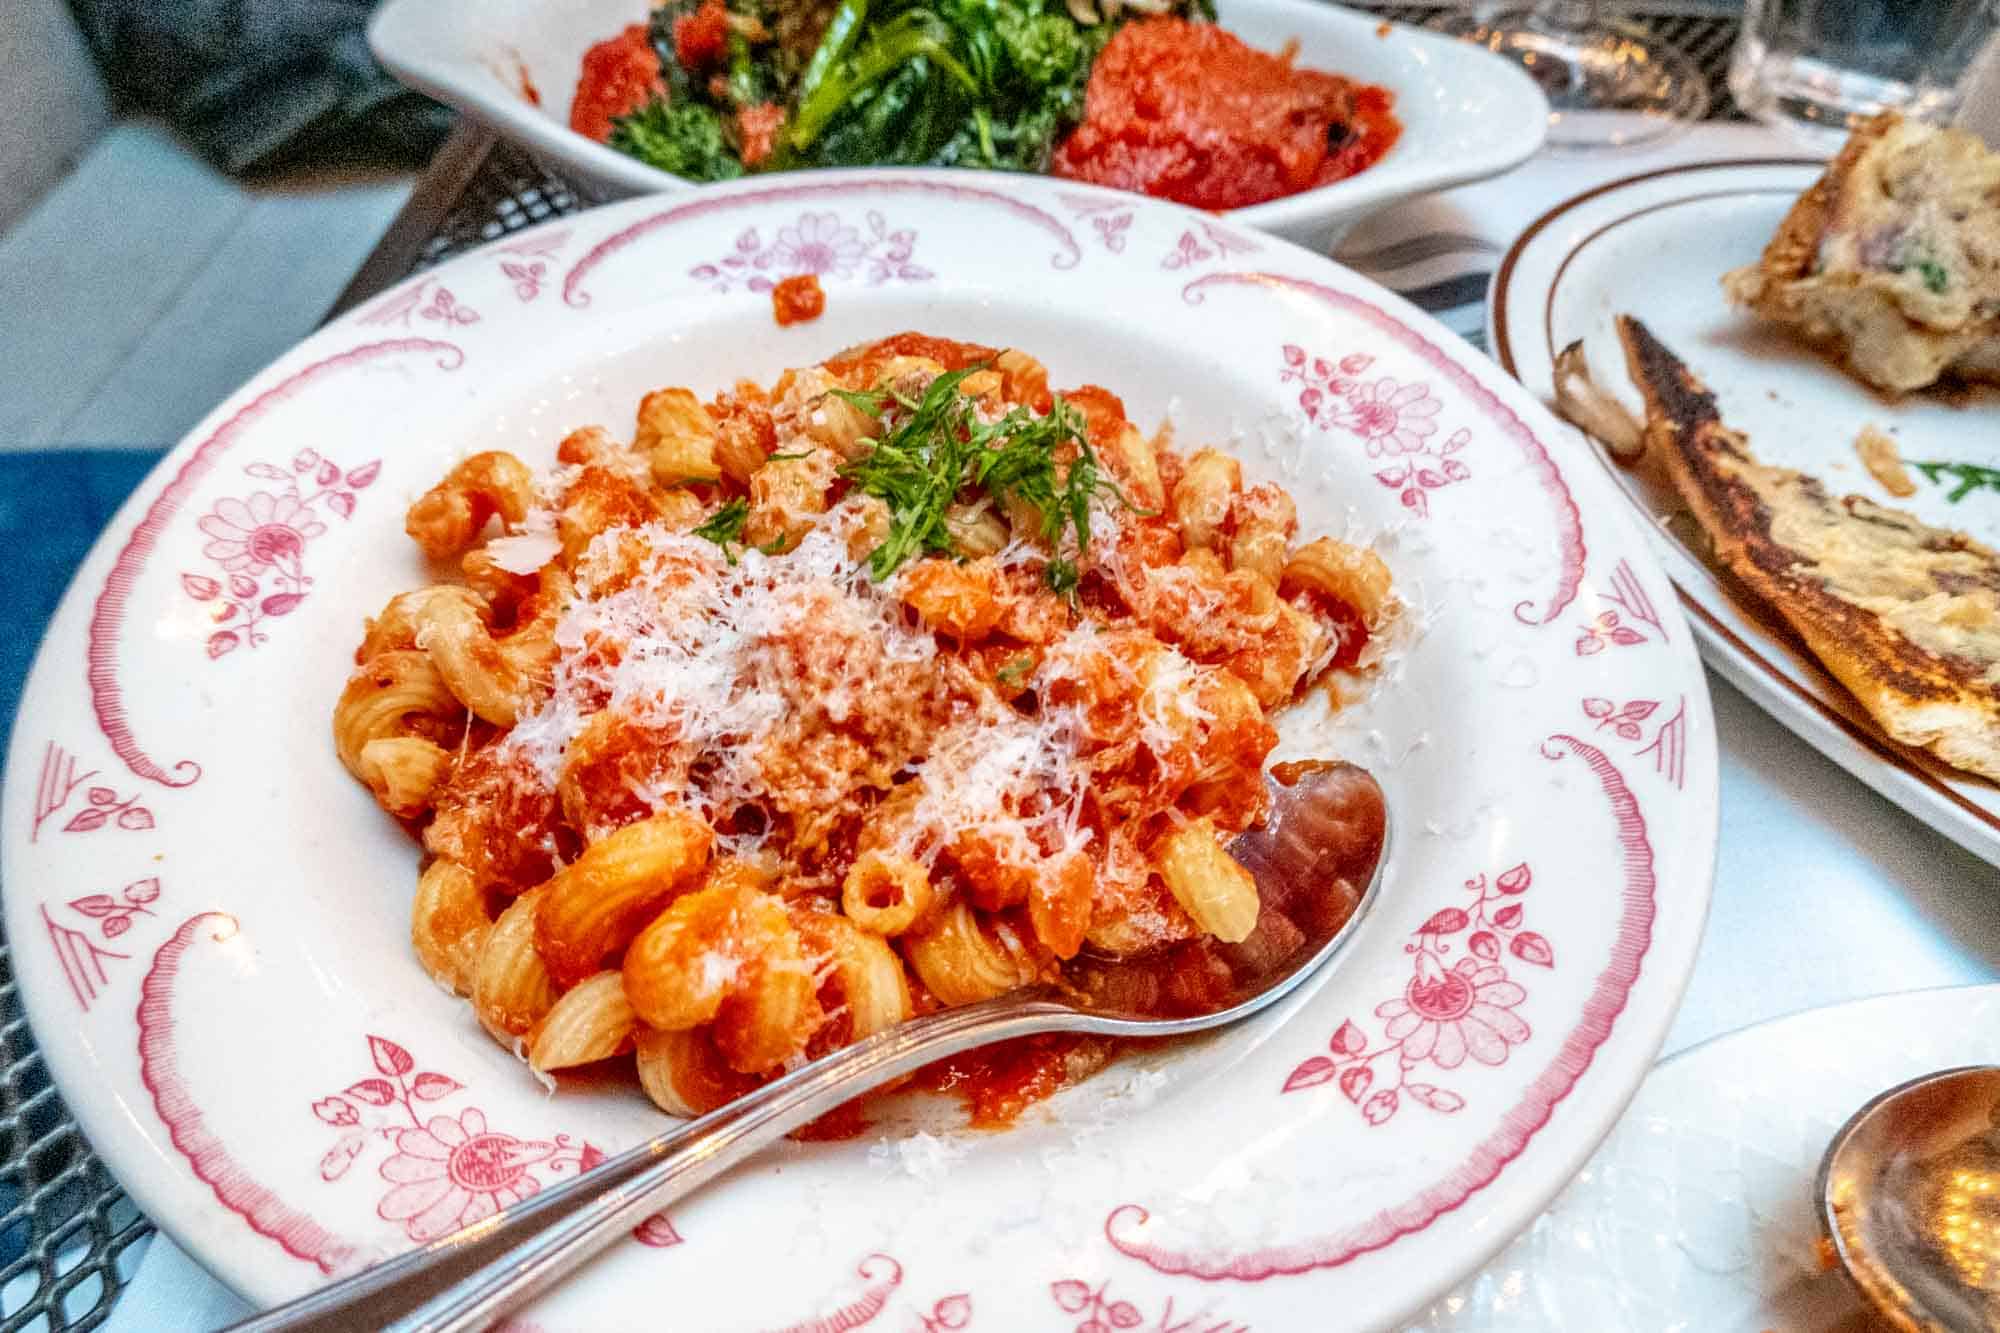 Macaroni and marinara sauce in a bowl beside other Italian dishes